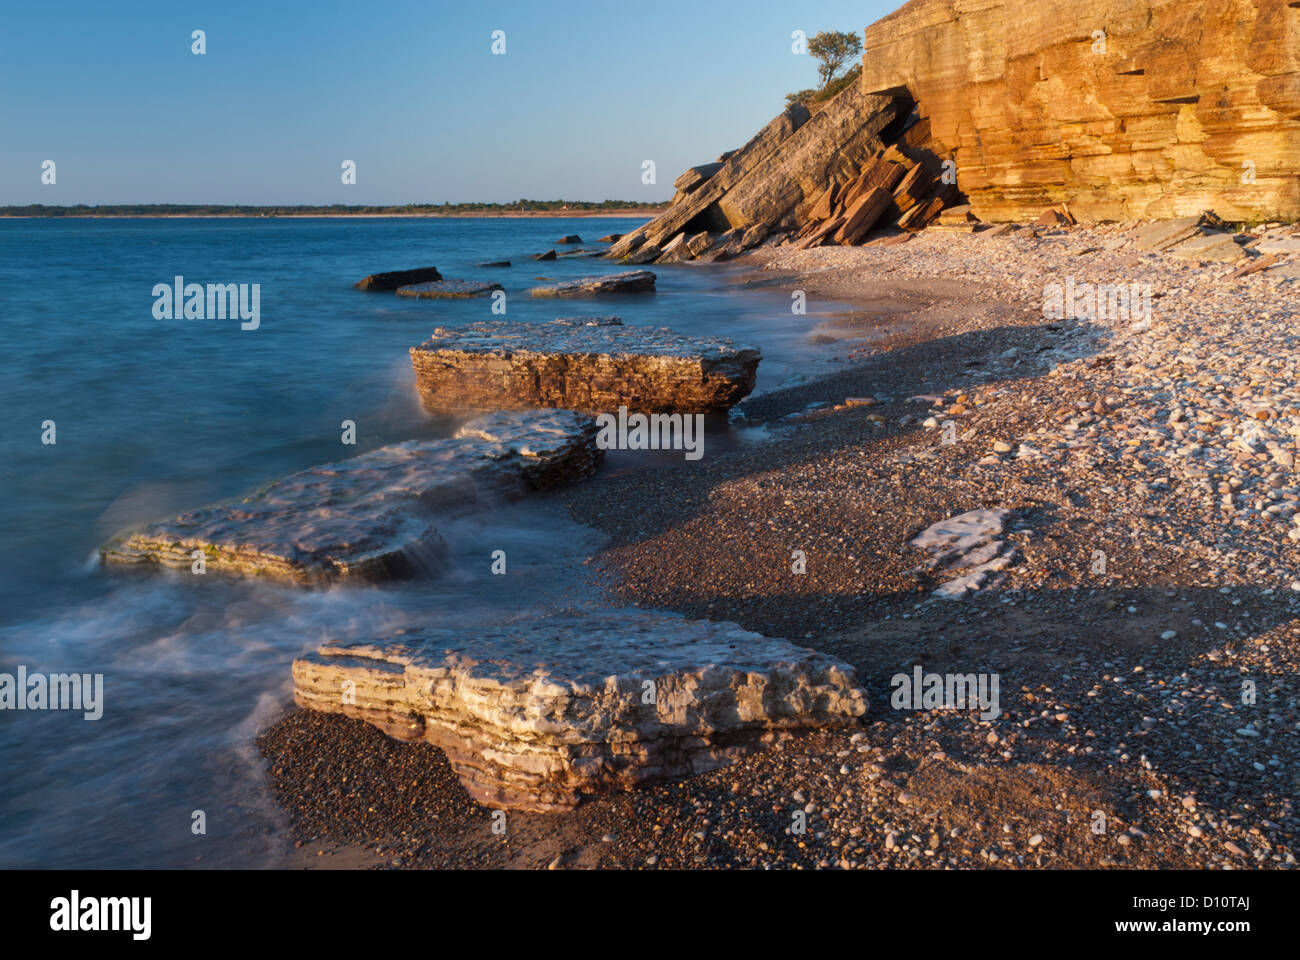 Coastline with stones and a cliff. A lonely tree. Stock Photo